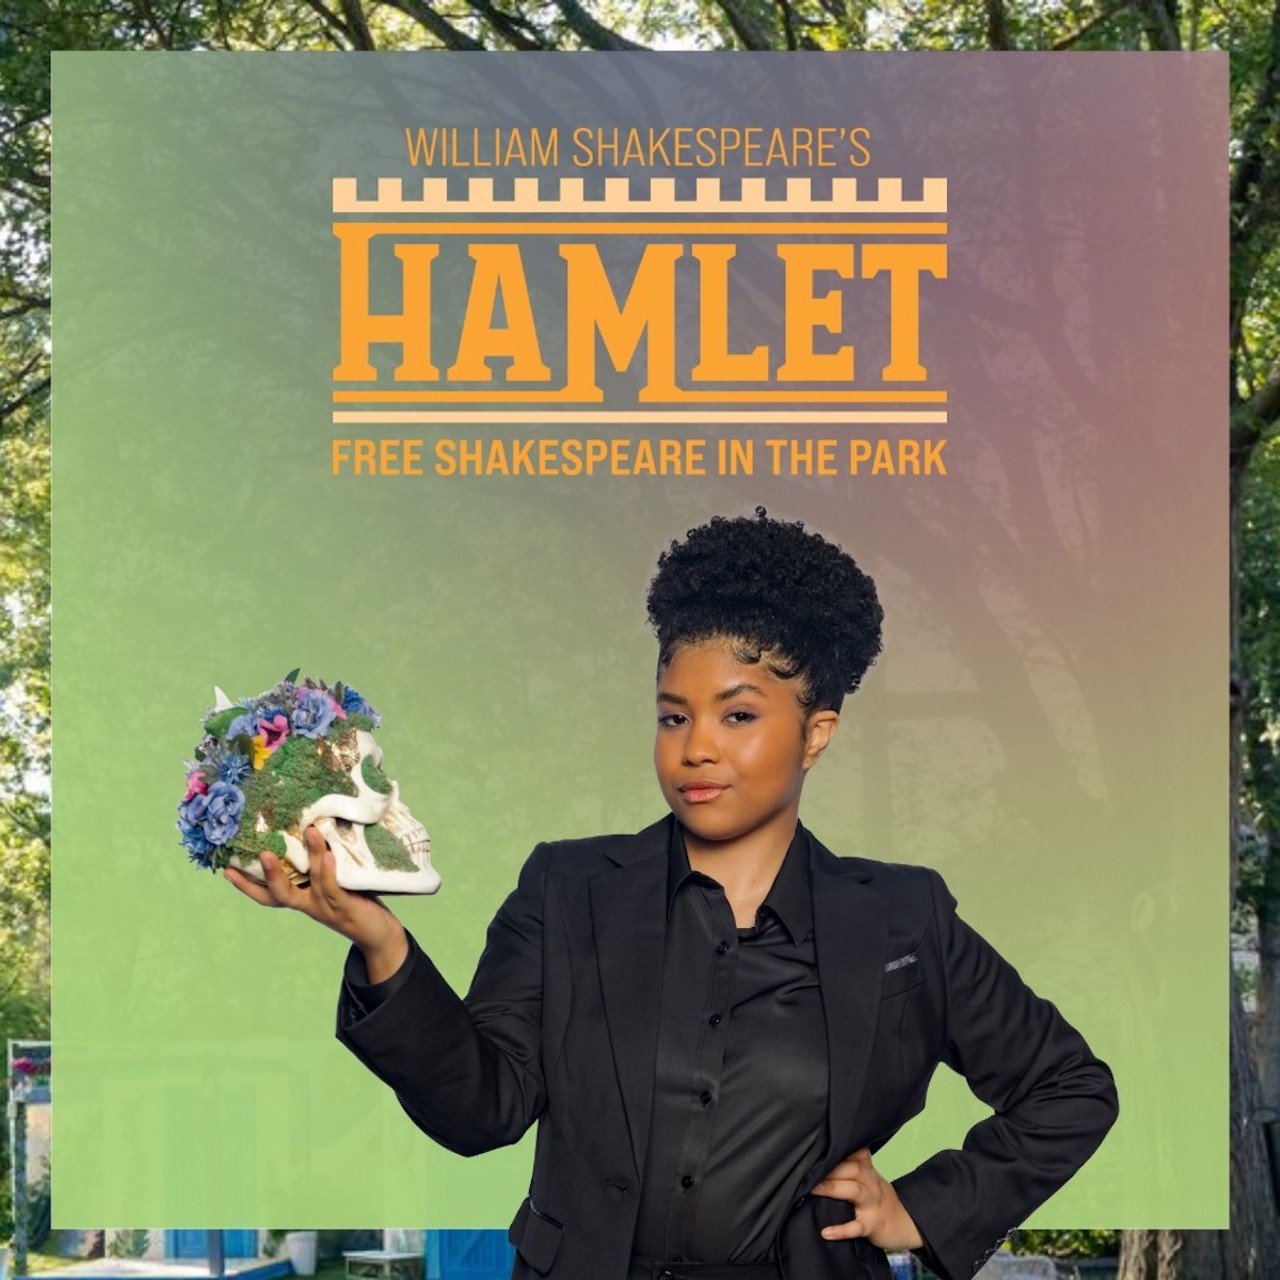 Soak Up Culture at Shakespeare in the Park
This summer, the Cincinnati Shakespeare Company is bringing its popular free Shakespeare in the Park series to public spots across the Tri-State. This summer’s production is Hamlet, the tale of Hamlet, a Danish prince, grappling with his father’s murder and his mother subsequently marrying the murderer — (spoiler alert) Hamlet’s uncle. “This summer, become immersed in the intrigue of Shakespeare's Hamlet — a riveting blend of passion, ghosts, and royal drama that promises to heat up your summer nights with gripping intensity,” says CSC. The season runs from July 12 to Sept. 1.